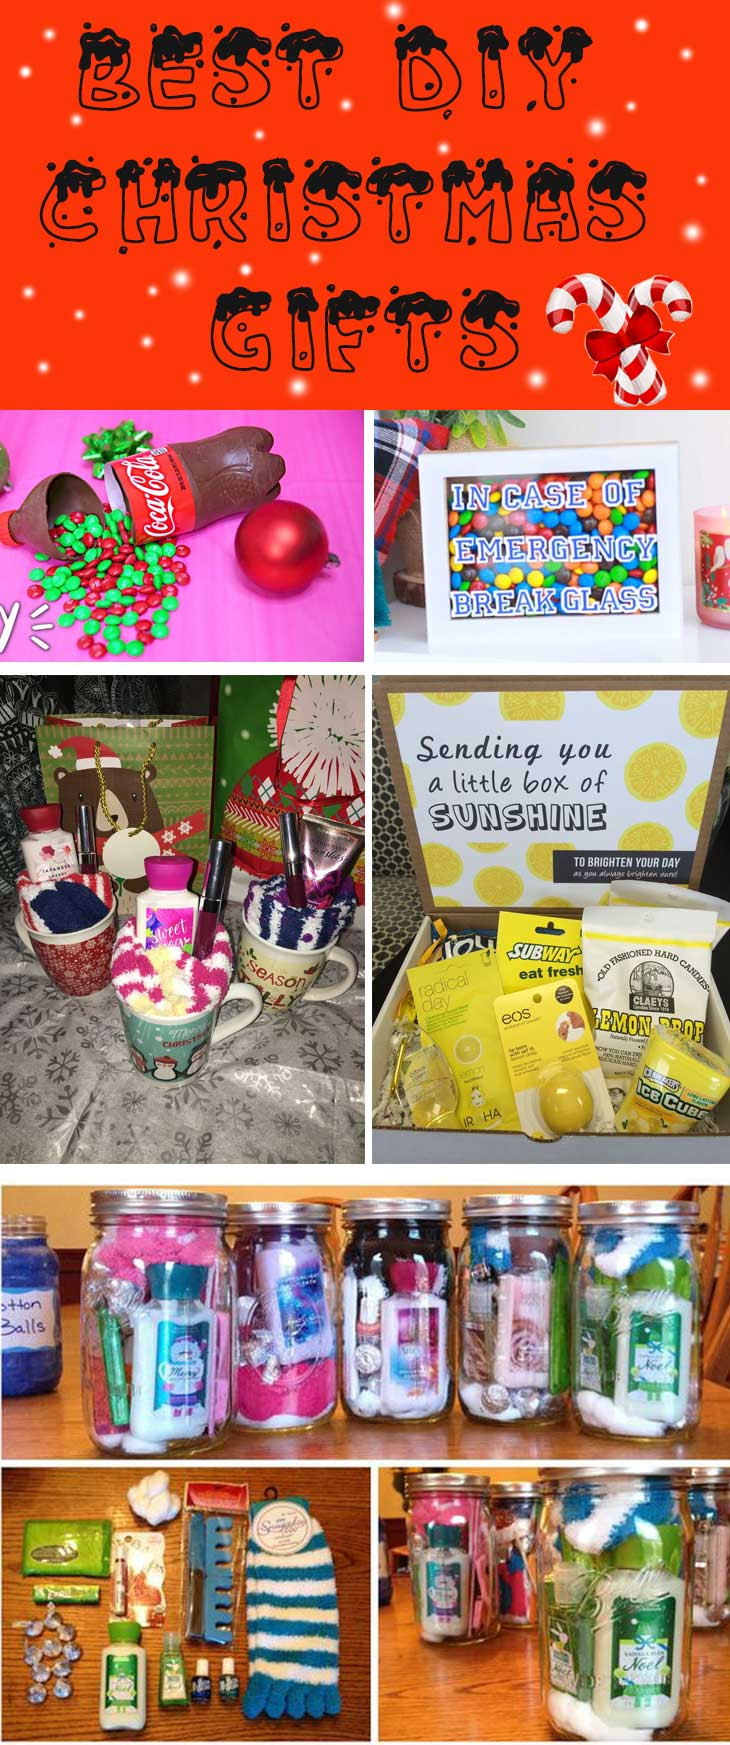 Best DIY Christmas Gifts
 Diy Christmas Gifts for Friends DIY Cuteness